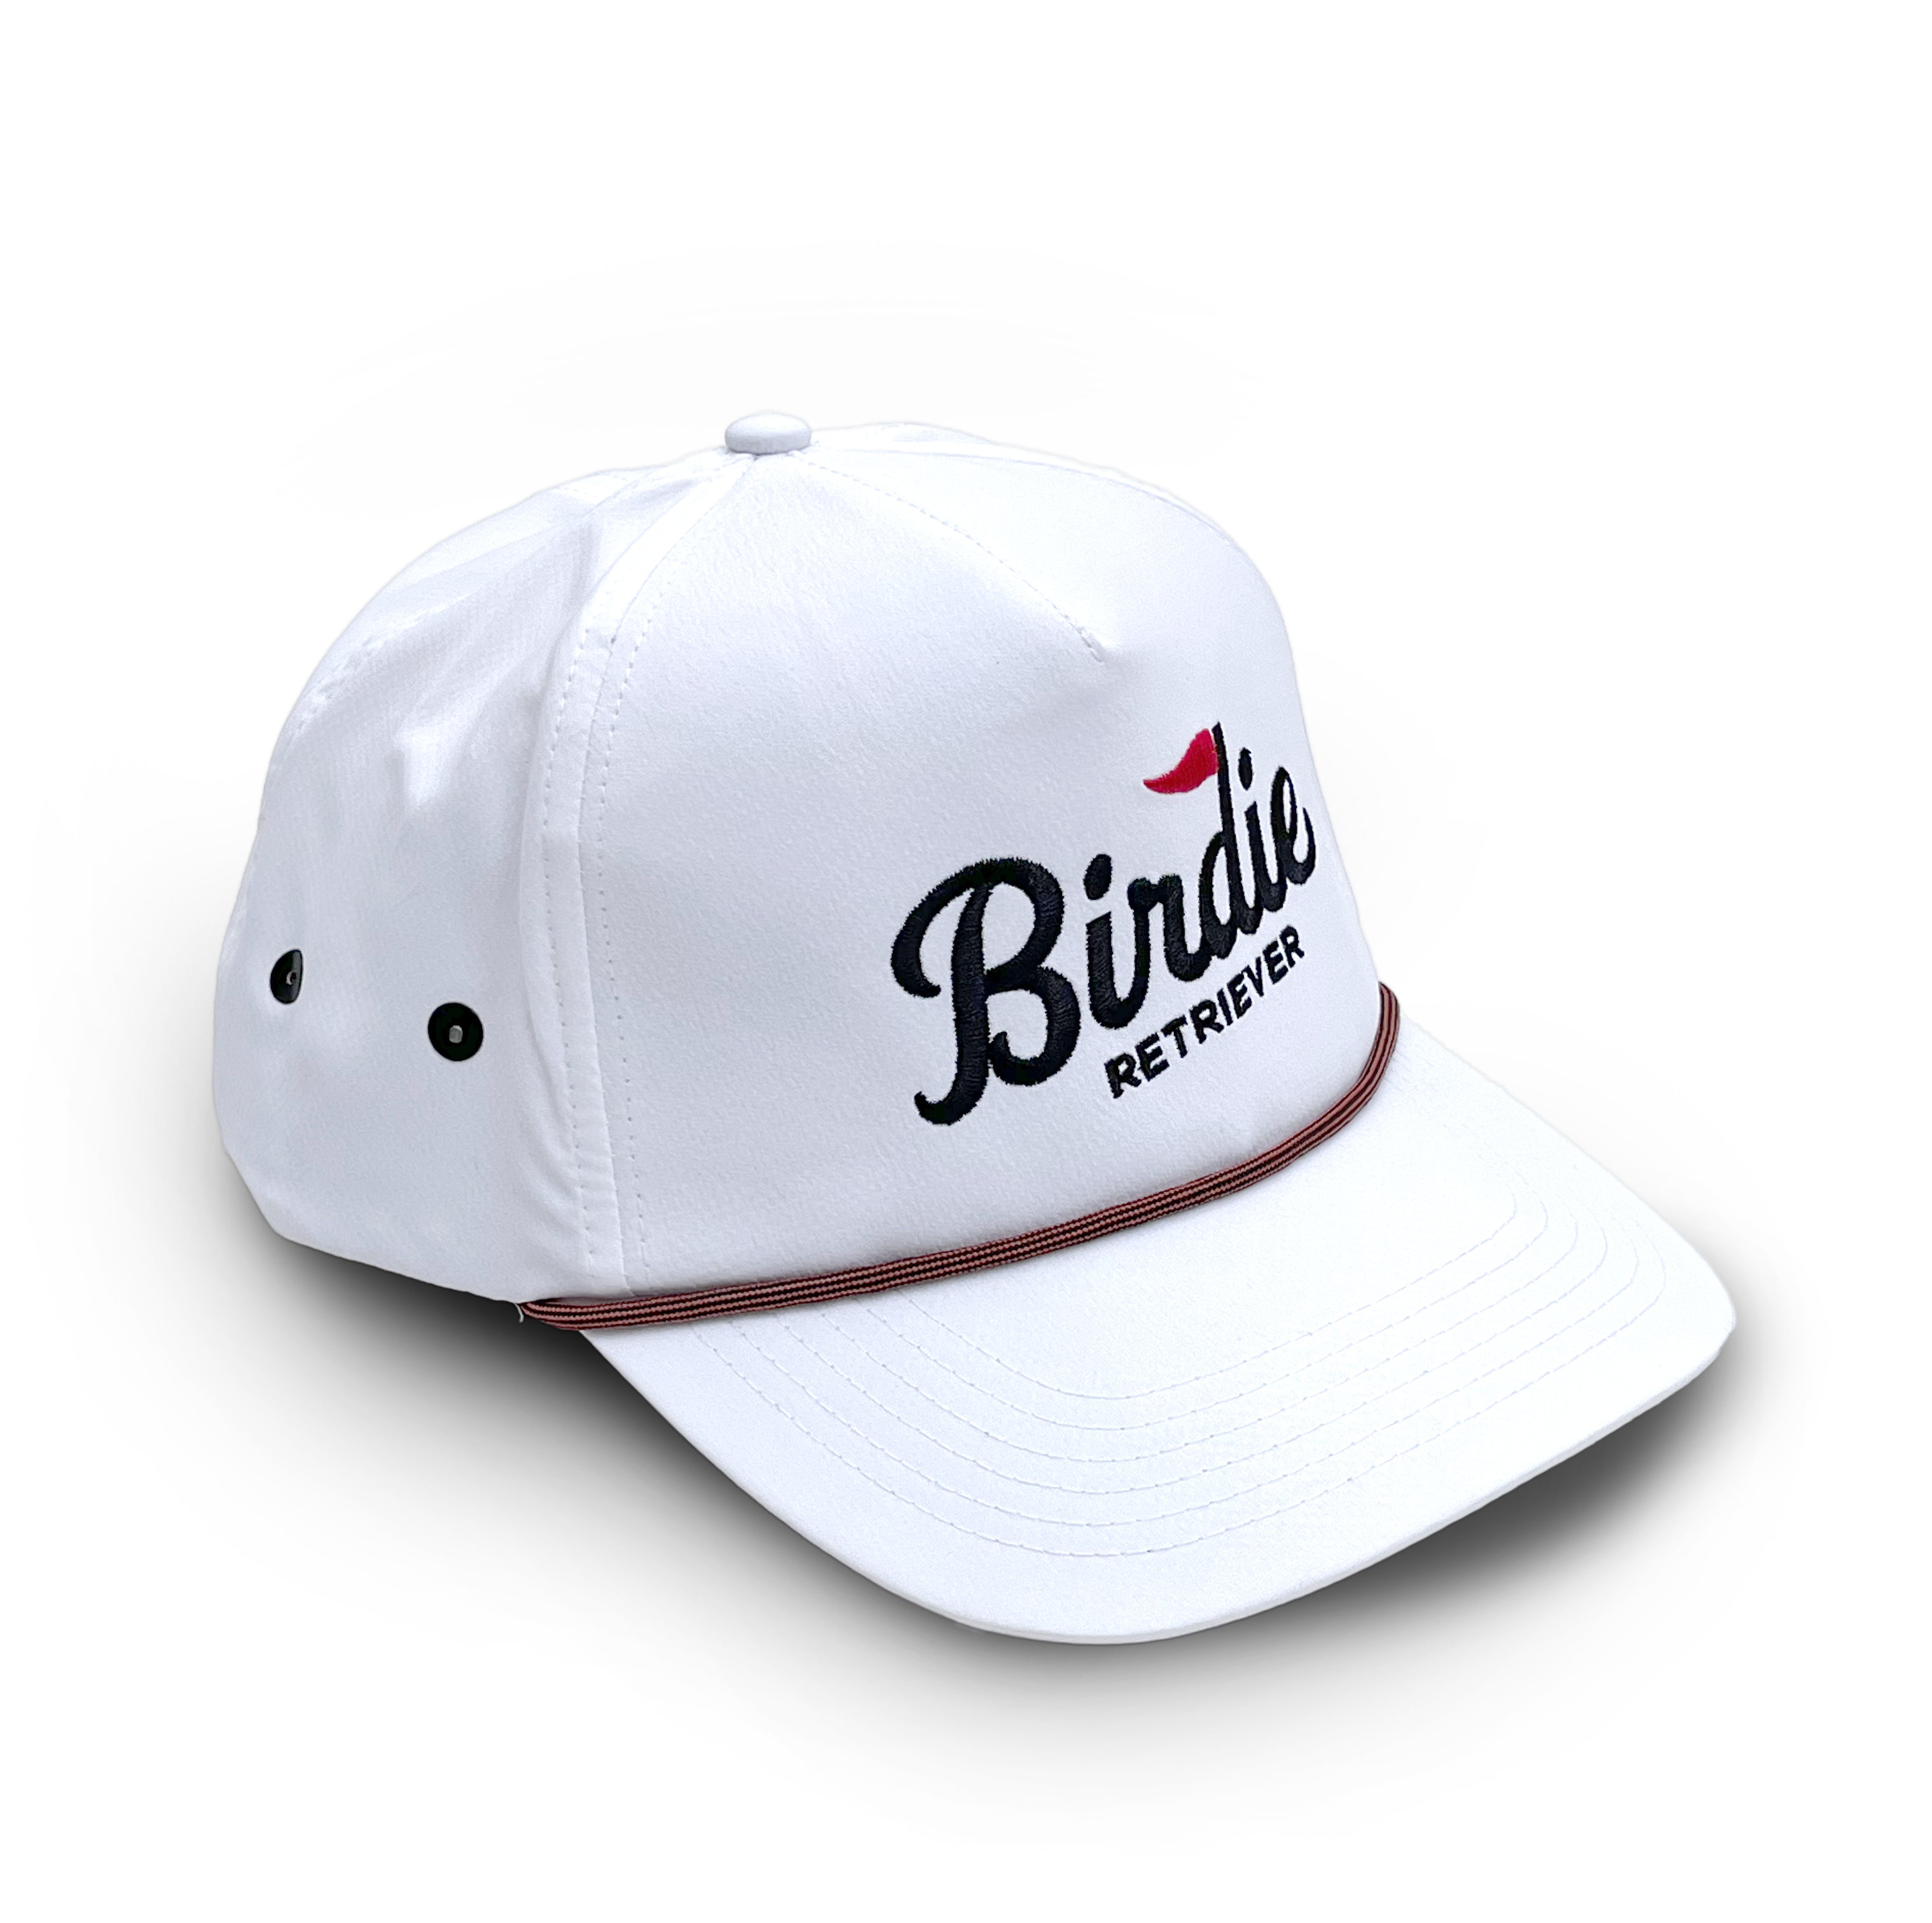 New!  BR Legacy Rope Hat